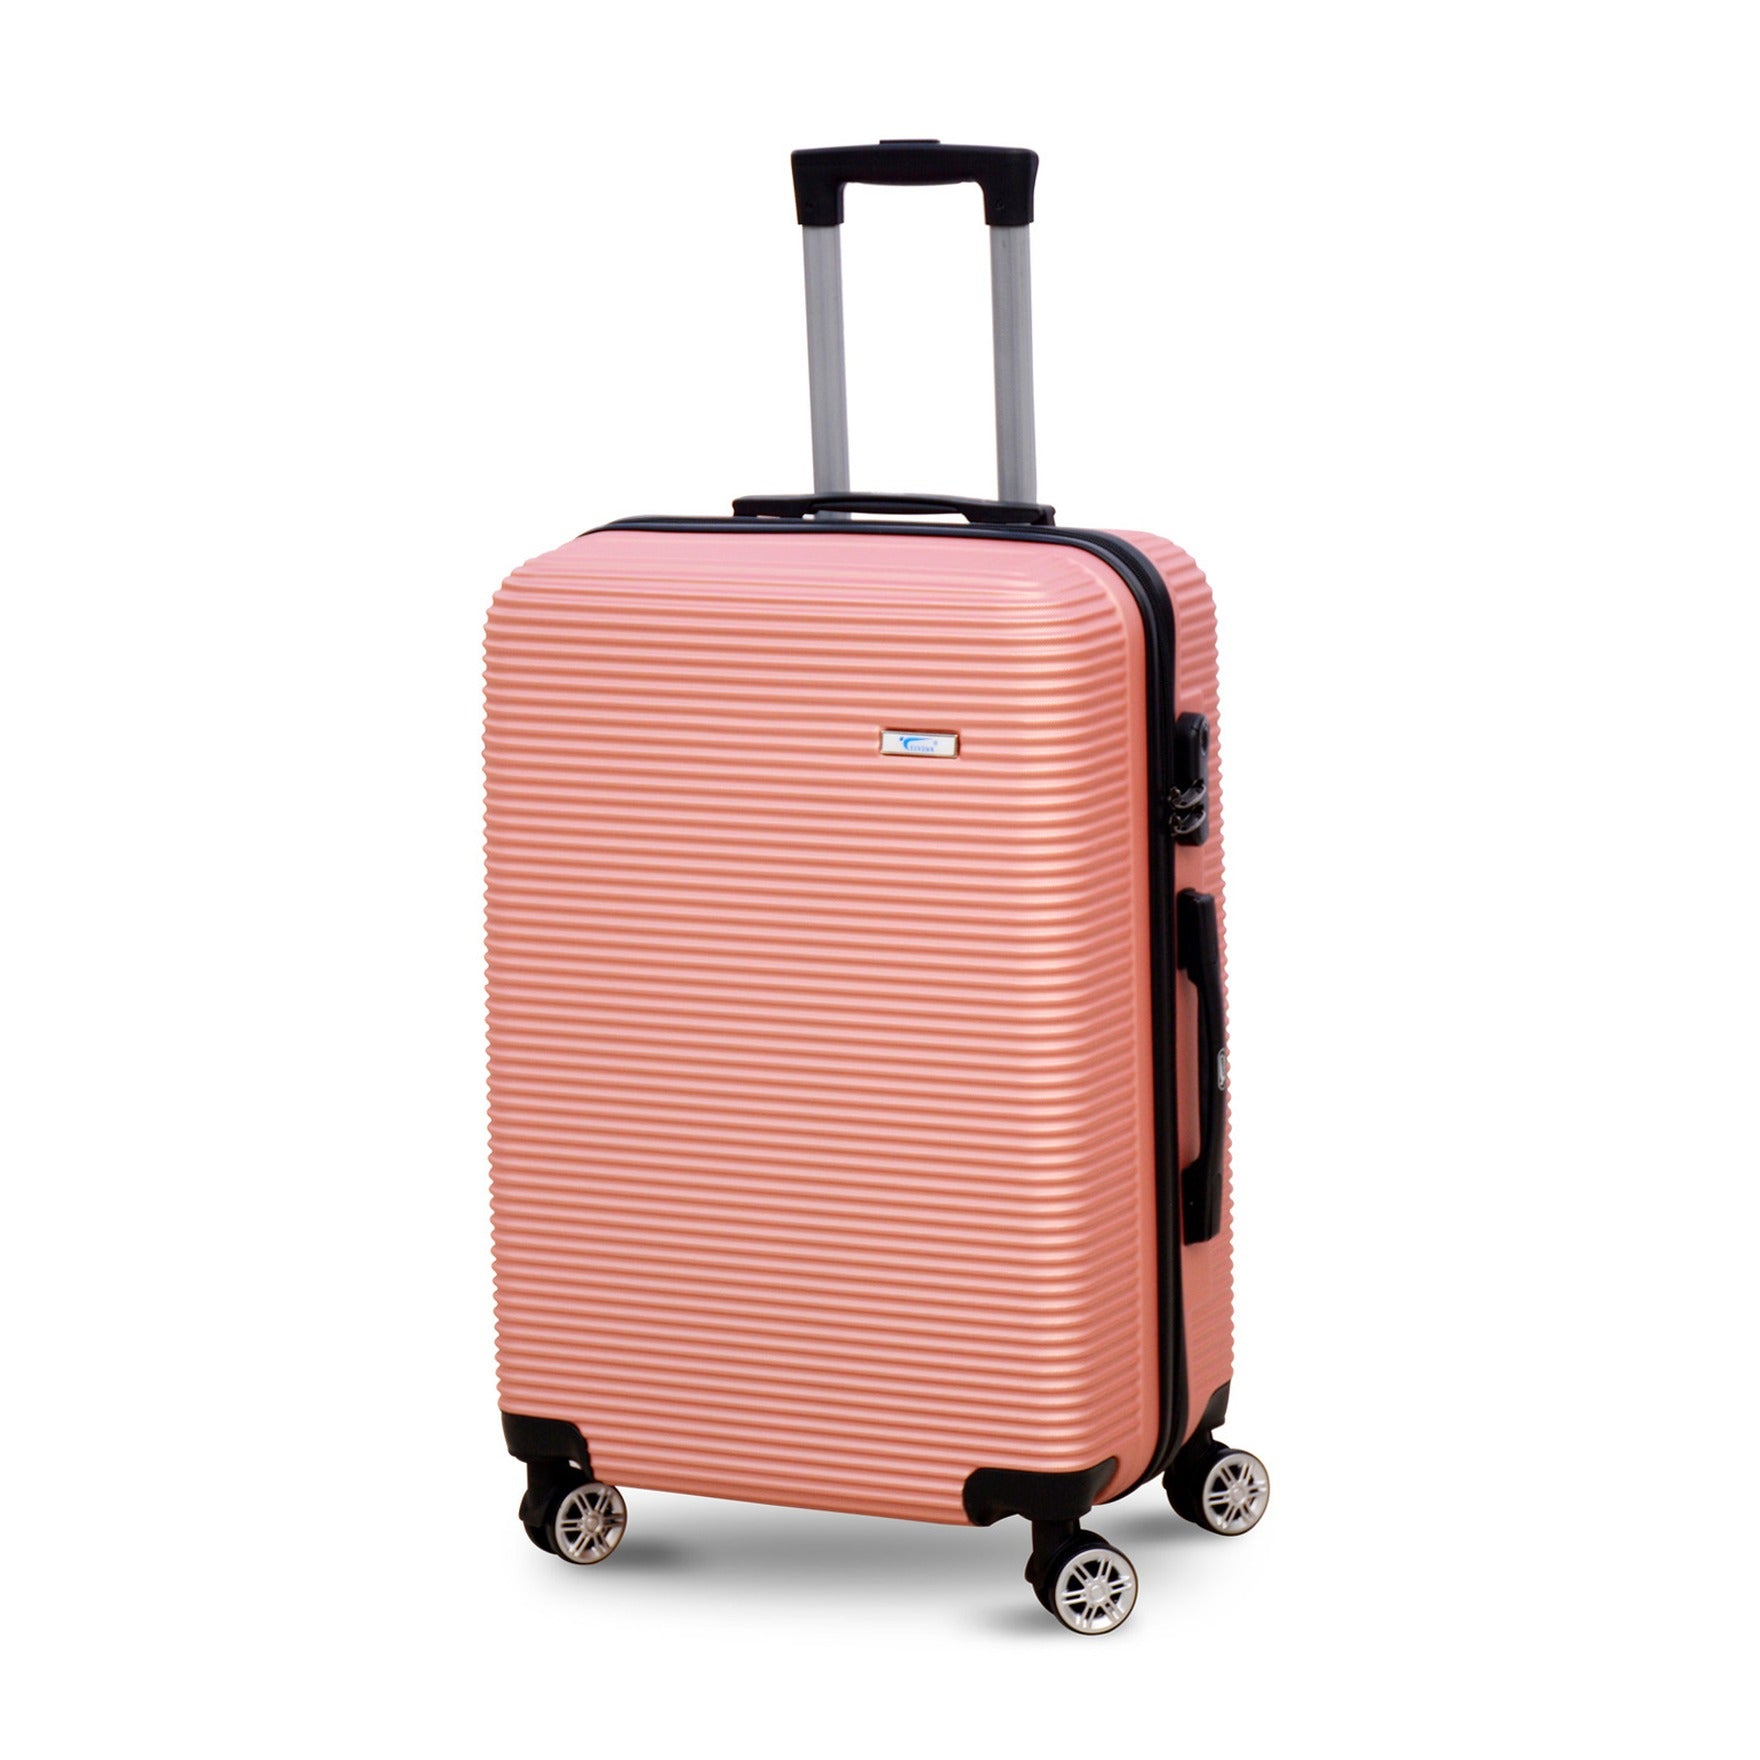 24" Dark Pink Colour JIAN ABS Line Luggage Lightweight Hard Case Trolley Bag With Spinner Wheel